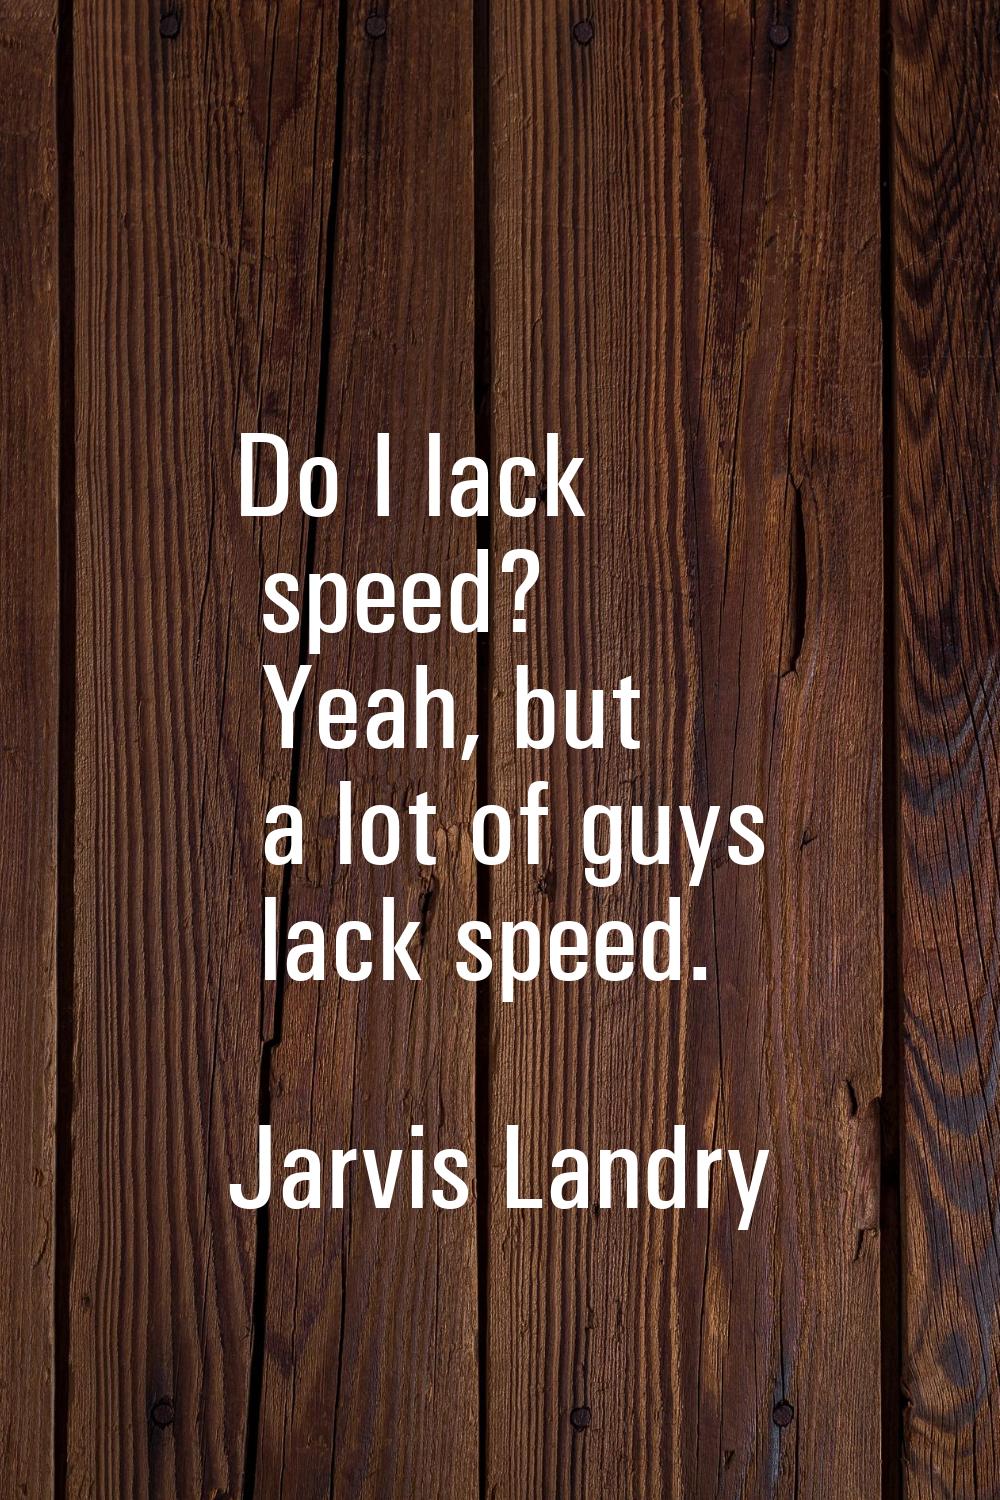 Do I lack speed? Yeah, but a lot of guys lack speed.